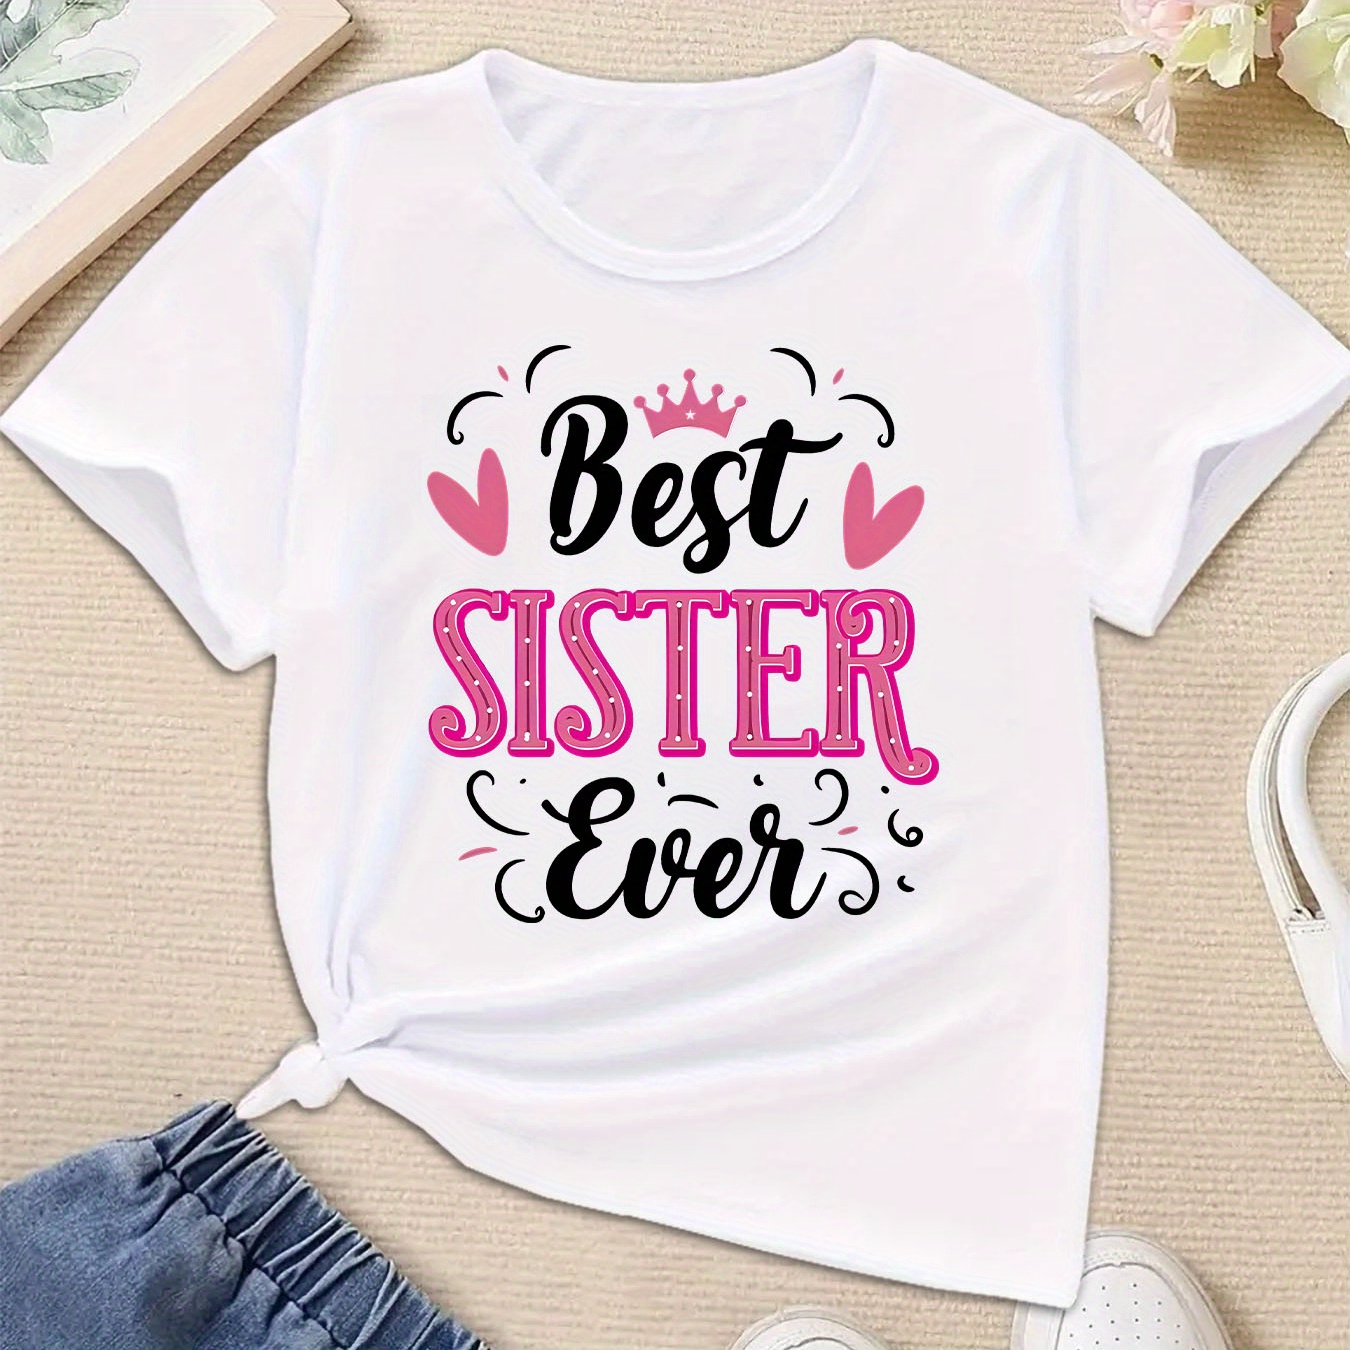 

Best Sister Even Creative Letter & Pattern Print Design Girls Casual Comfortable Crew Neck Short-sleeved T-shirt For Summer, Fashion And All-match